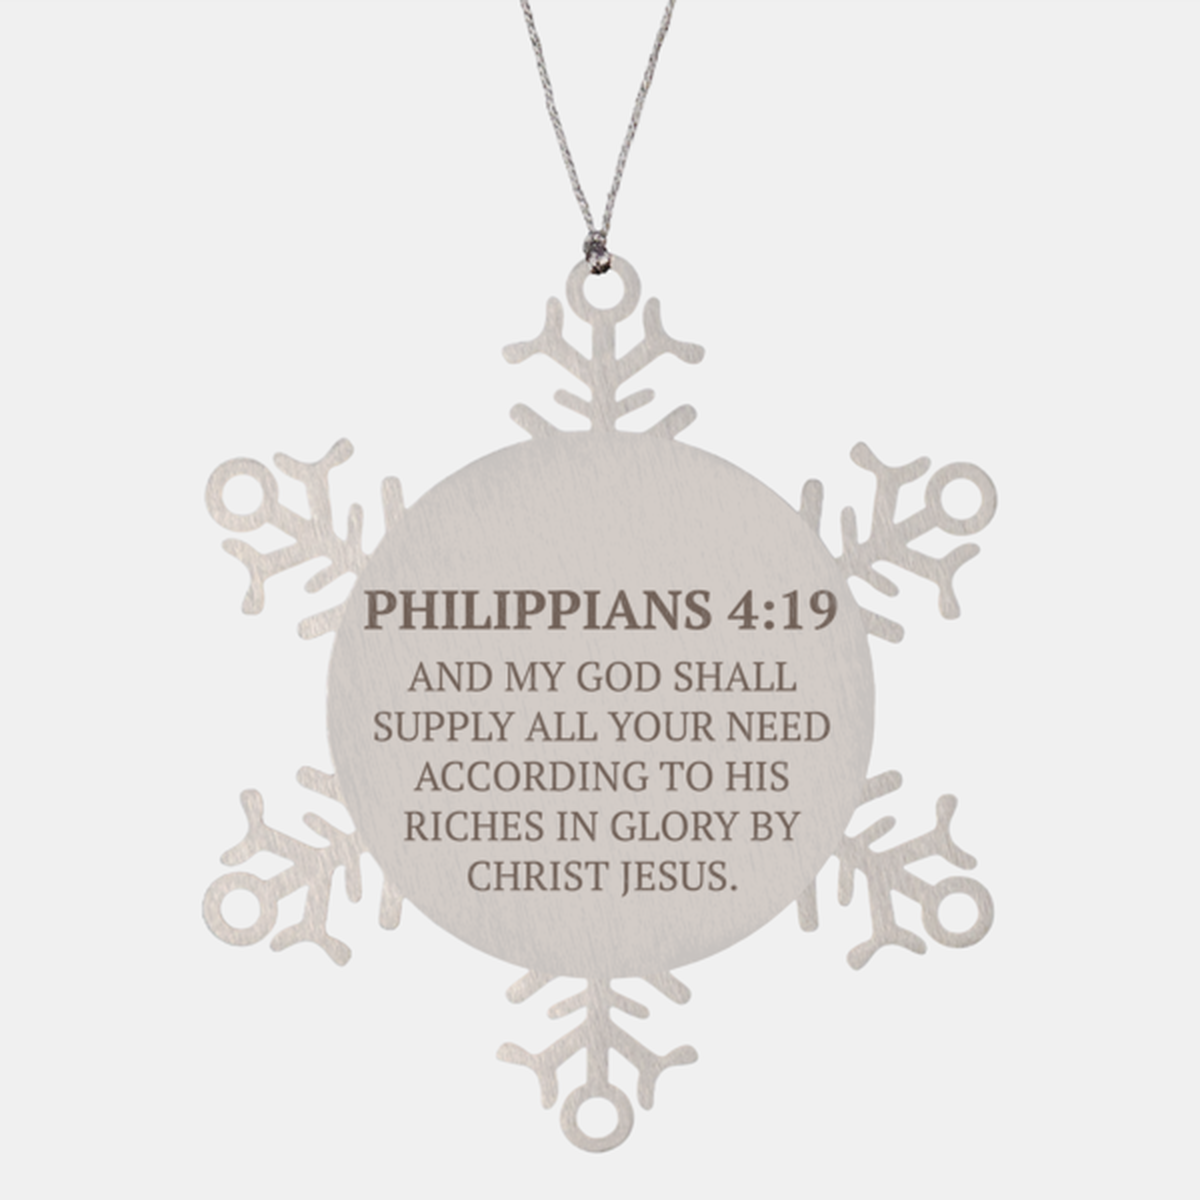 Christian Ornaments For Christmas Tree, And My God Shall Supply All Your Need, Religious Christmas Decorations, Scripture Ornaments Gifts, Bible Verse Ornament